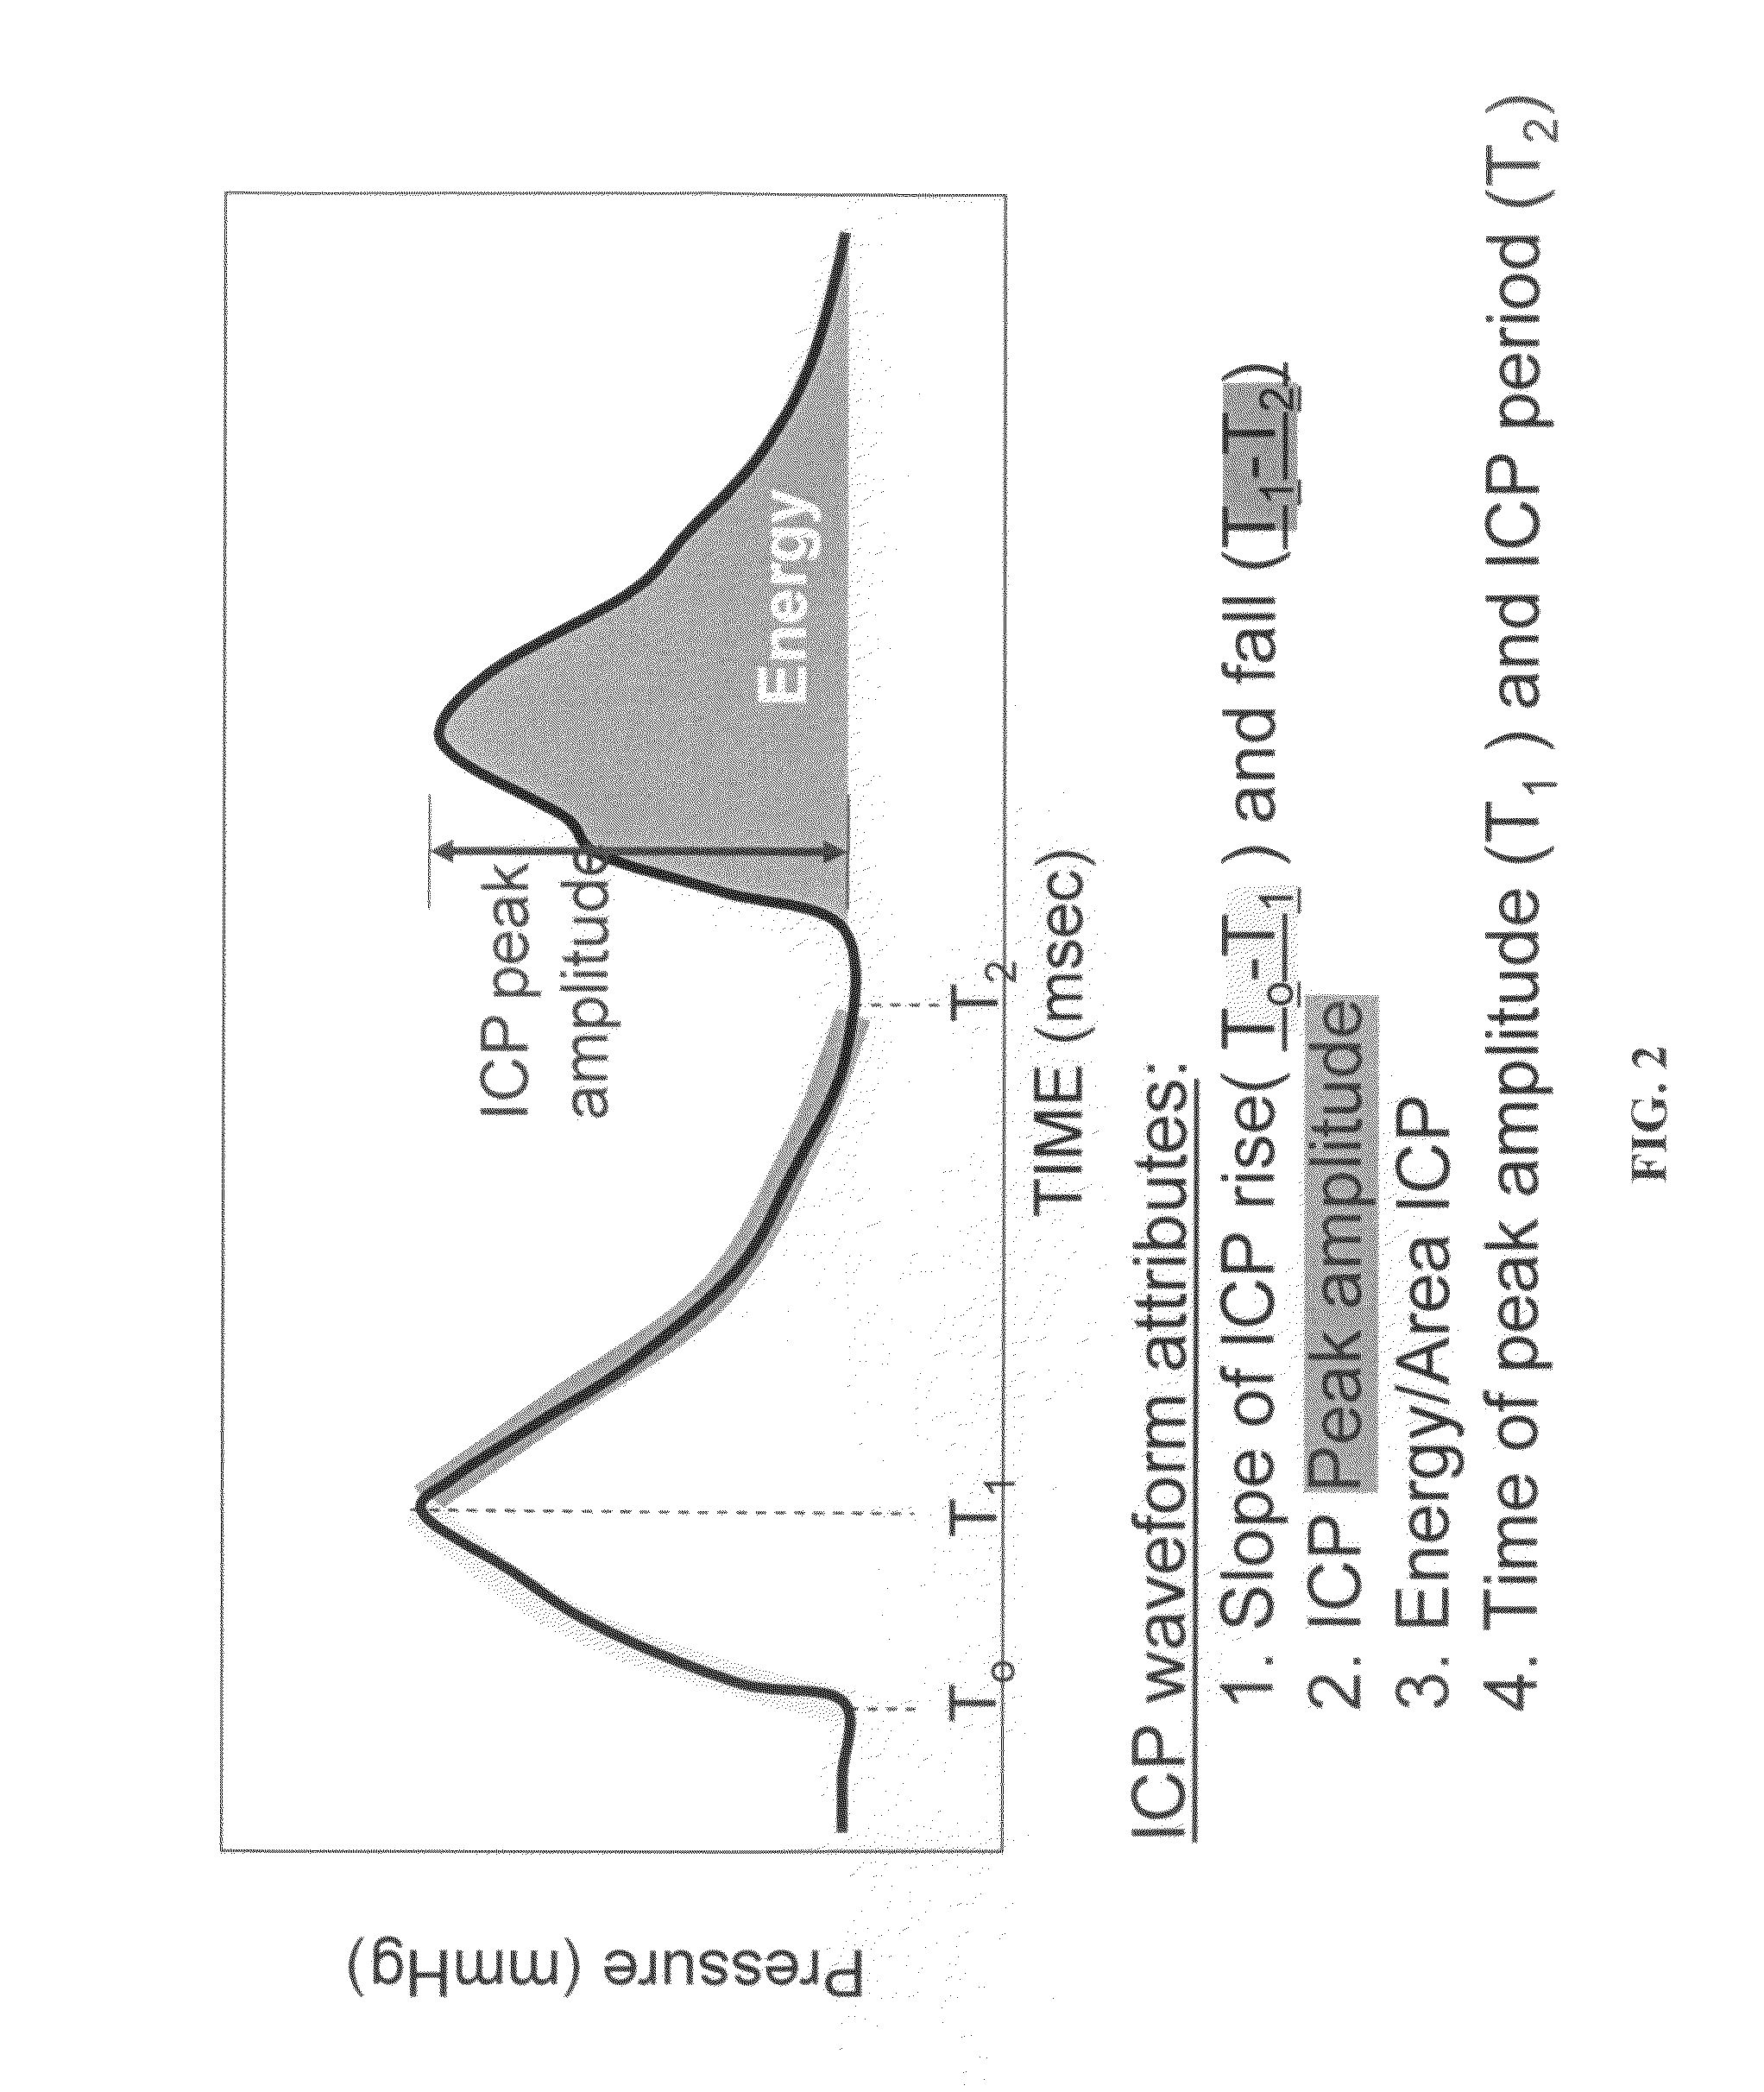 Medical oscillating compliance devices and uses thereof